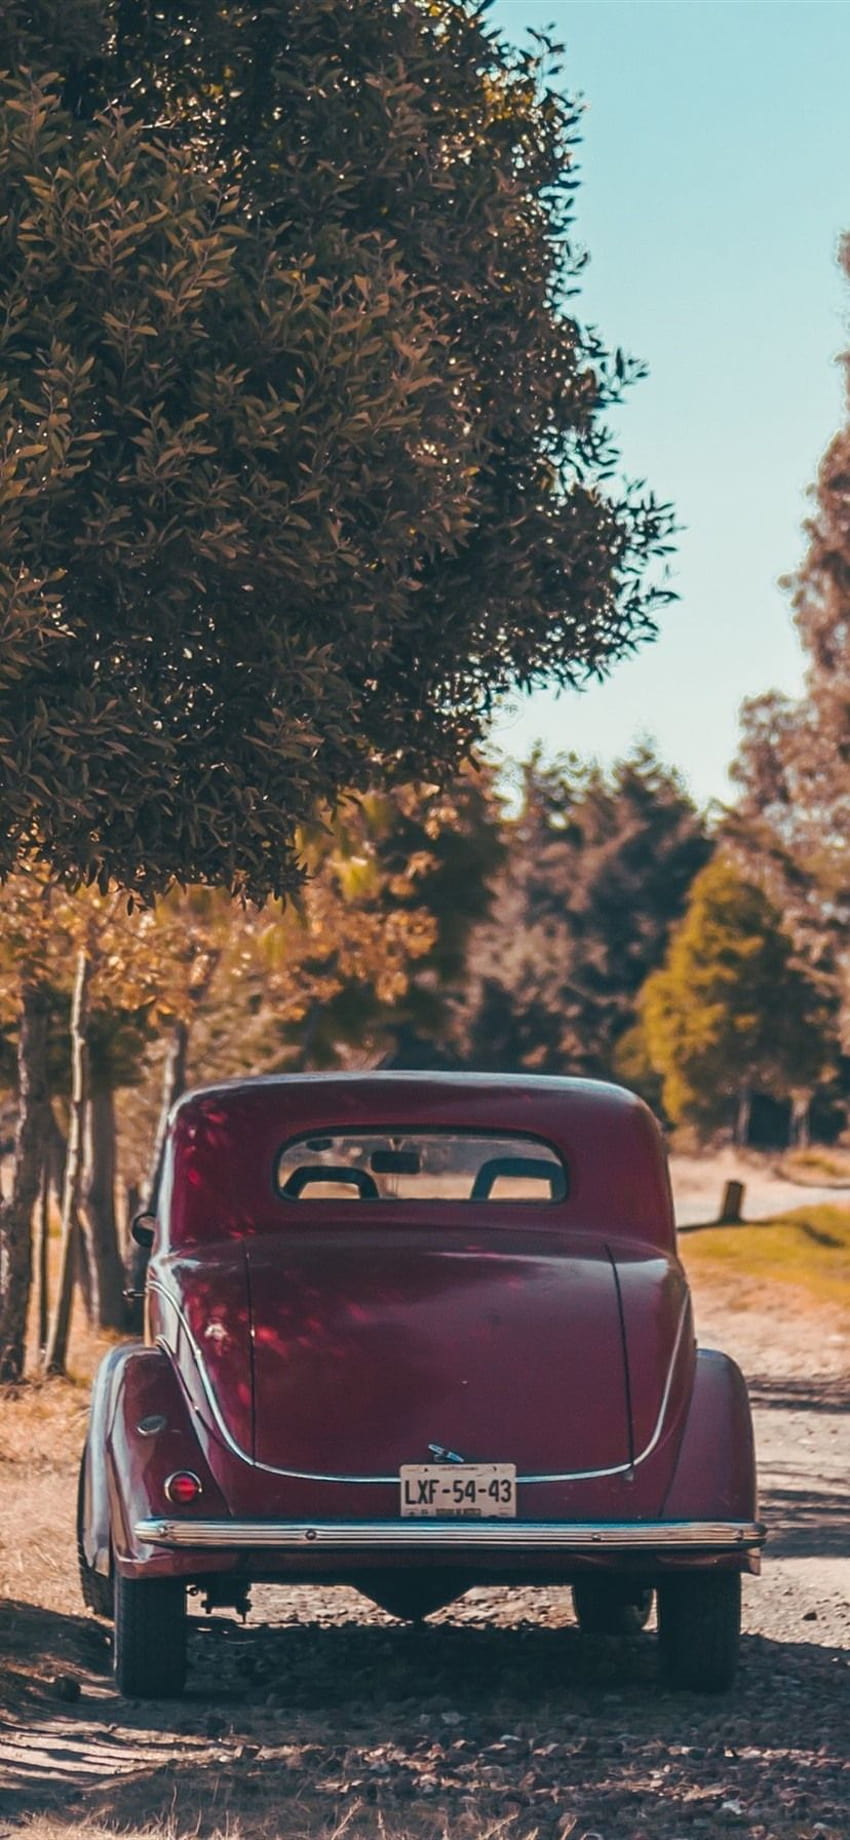 Red retro car rear view, man, trees, autumn 1080x1920 iPhone 8/7/6, vintage iphone 11 HD phone wallpaper